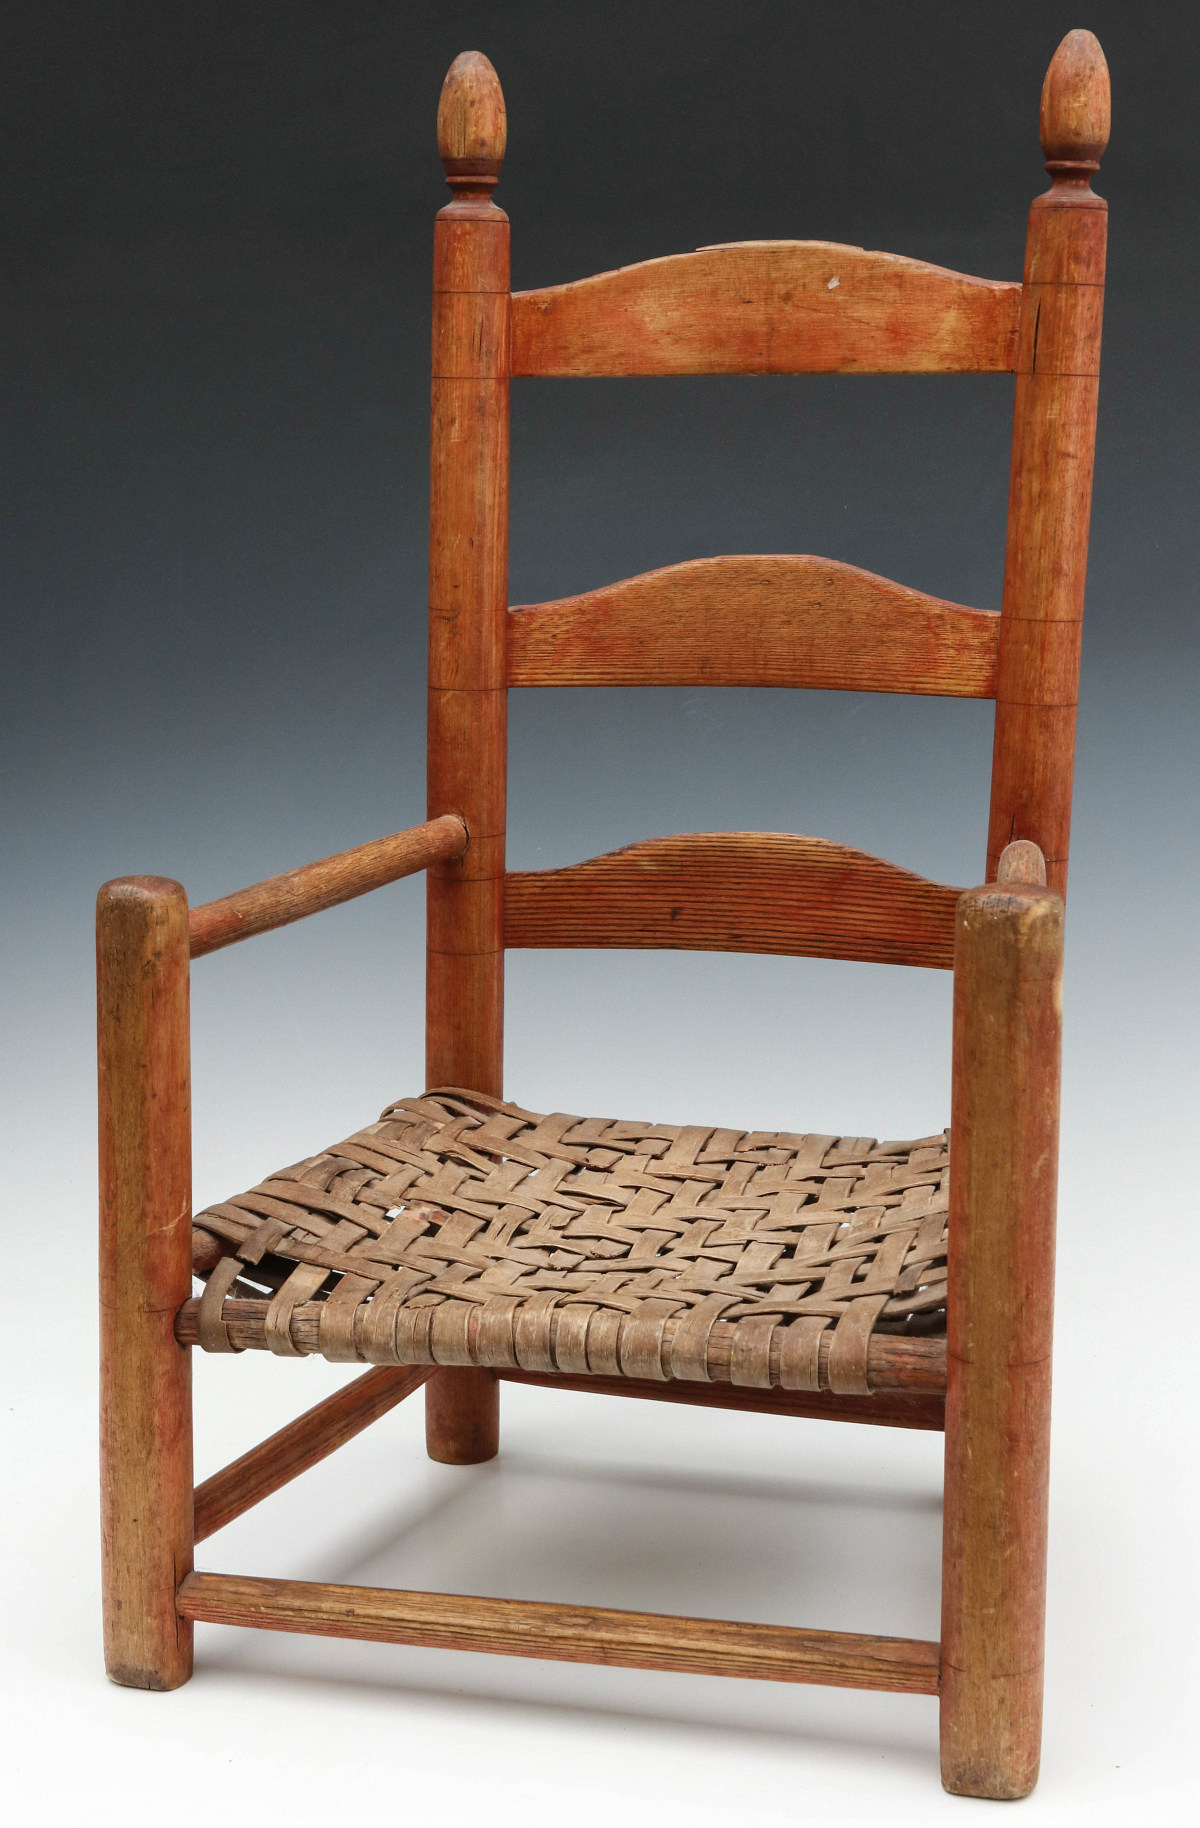 AN EARLY AMERICAN LADDER BACK CHILD'S CHAIR WITH STAIN